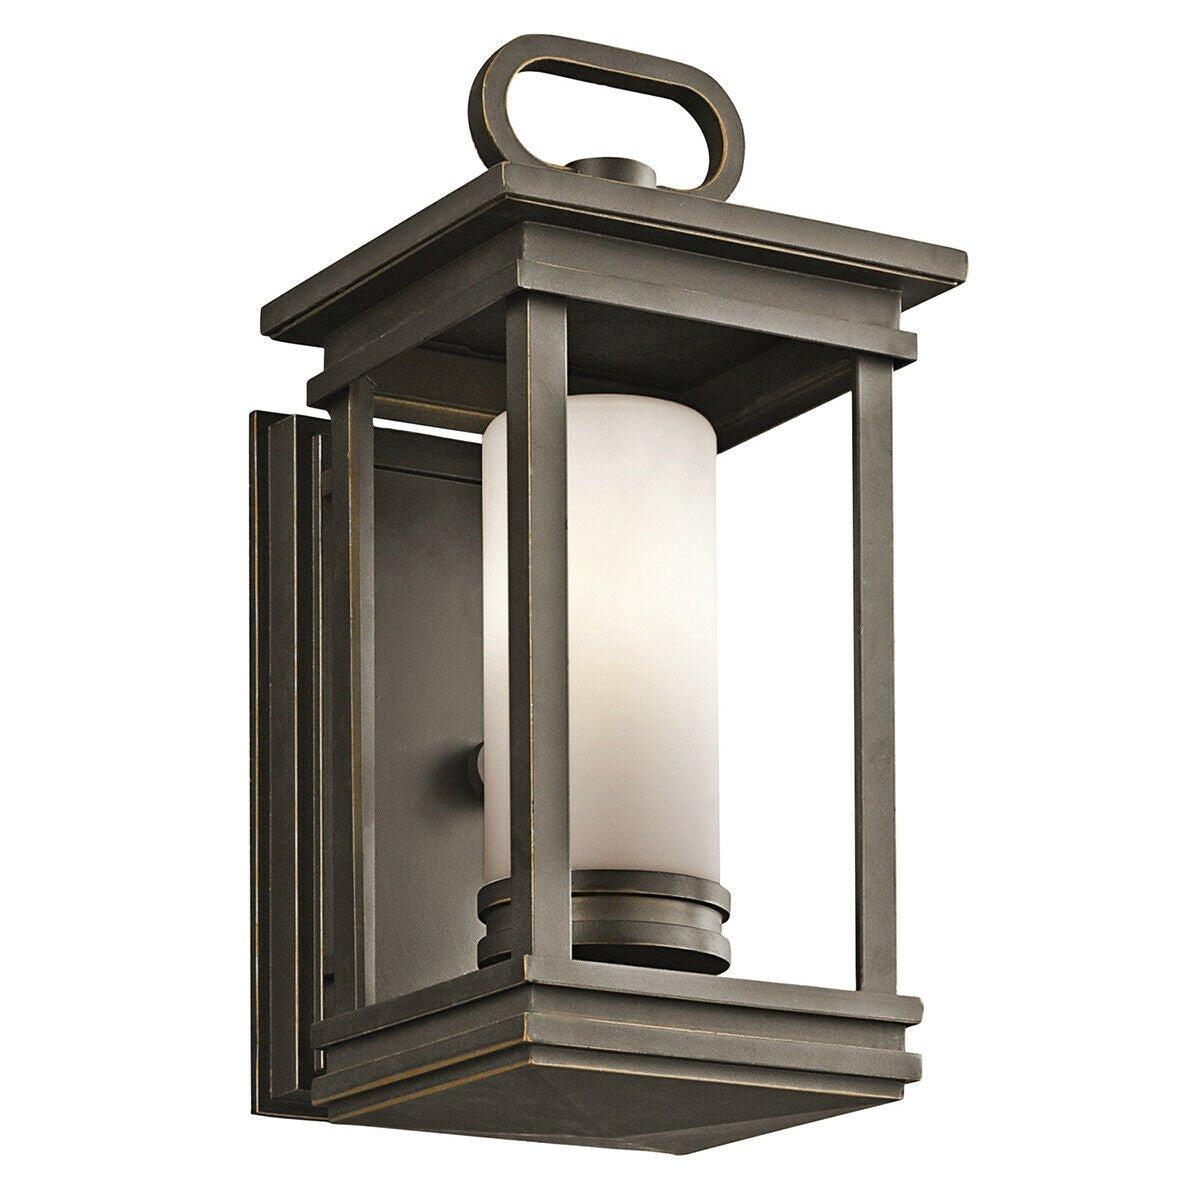 Outdoor IP44 Wall Light Sconce Rubbed Bronze LED E14 60W Bulb Outside External